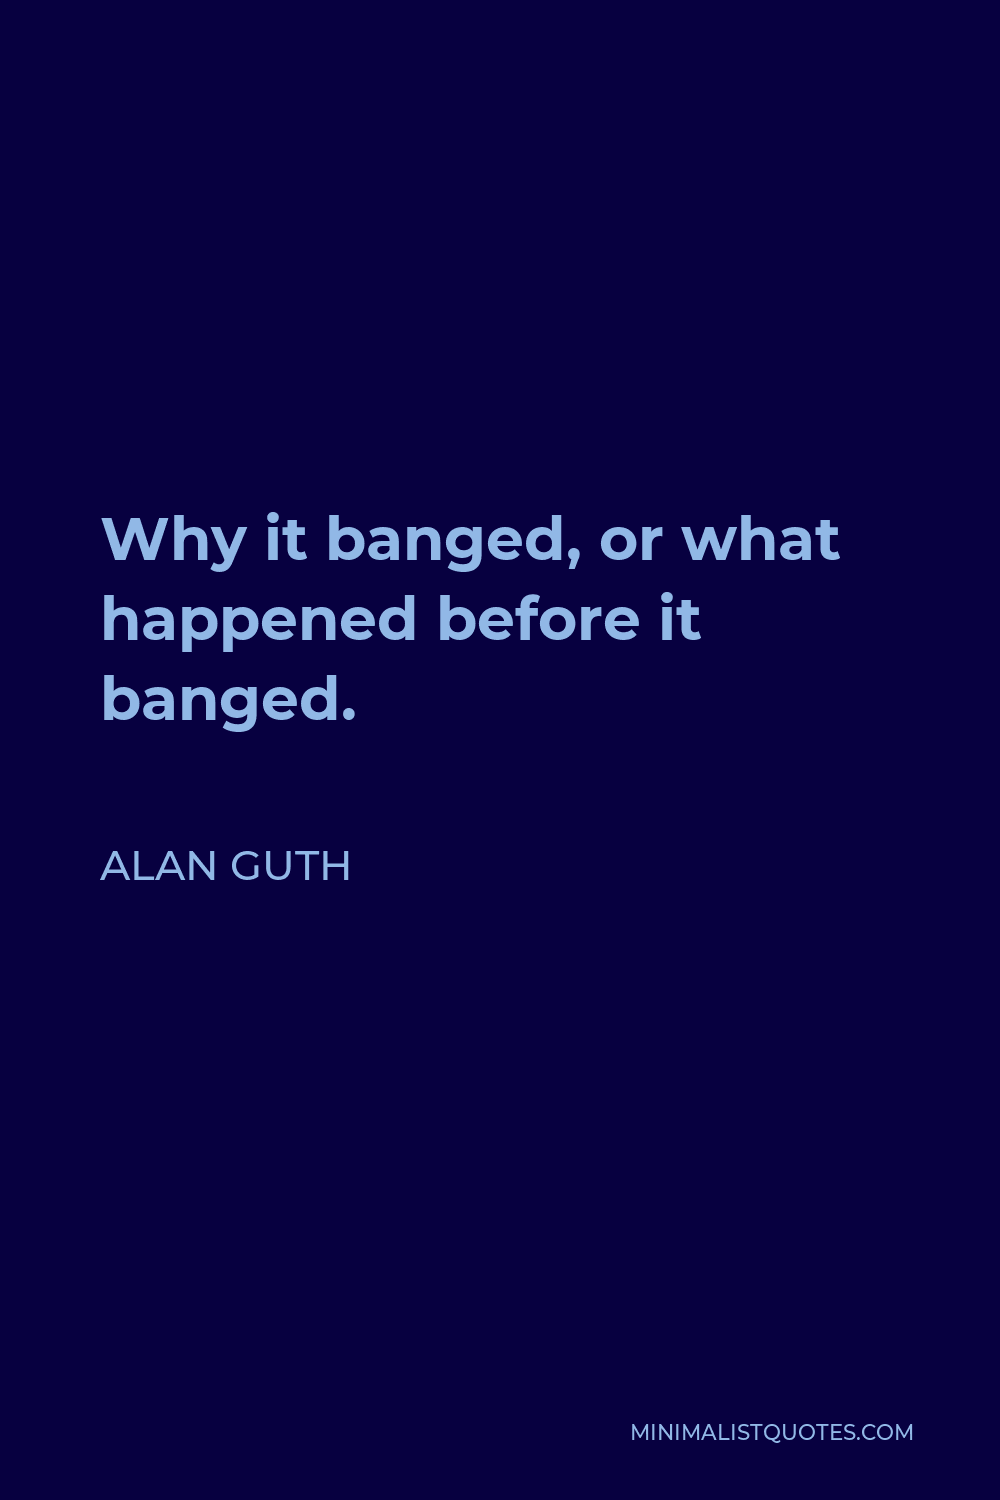 Alan Guth Quote - Why it banged, or what happened before it banged.